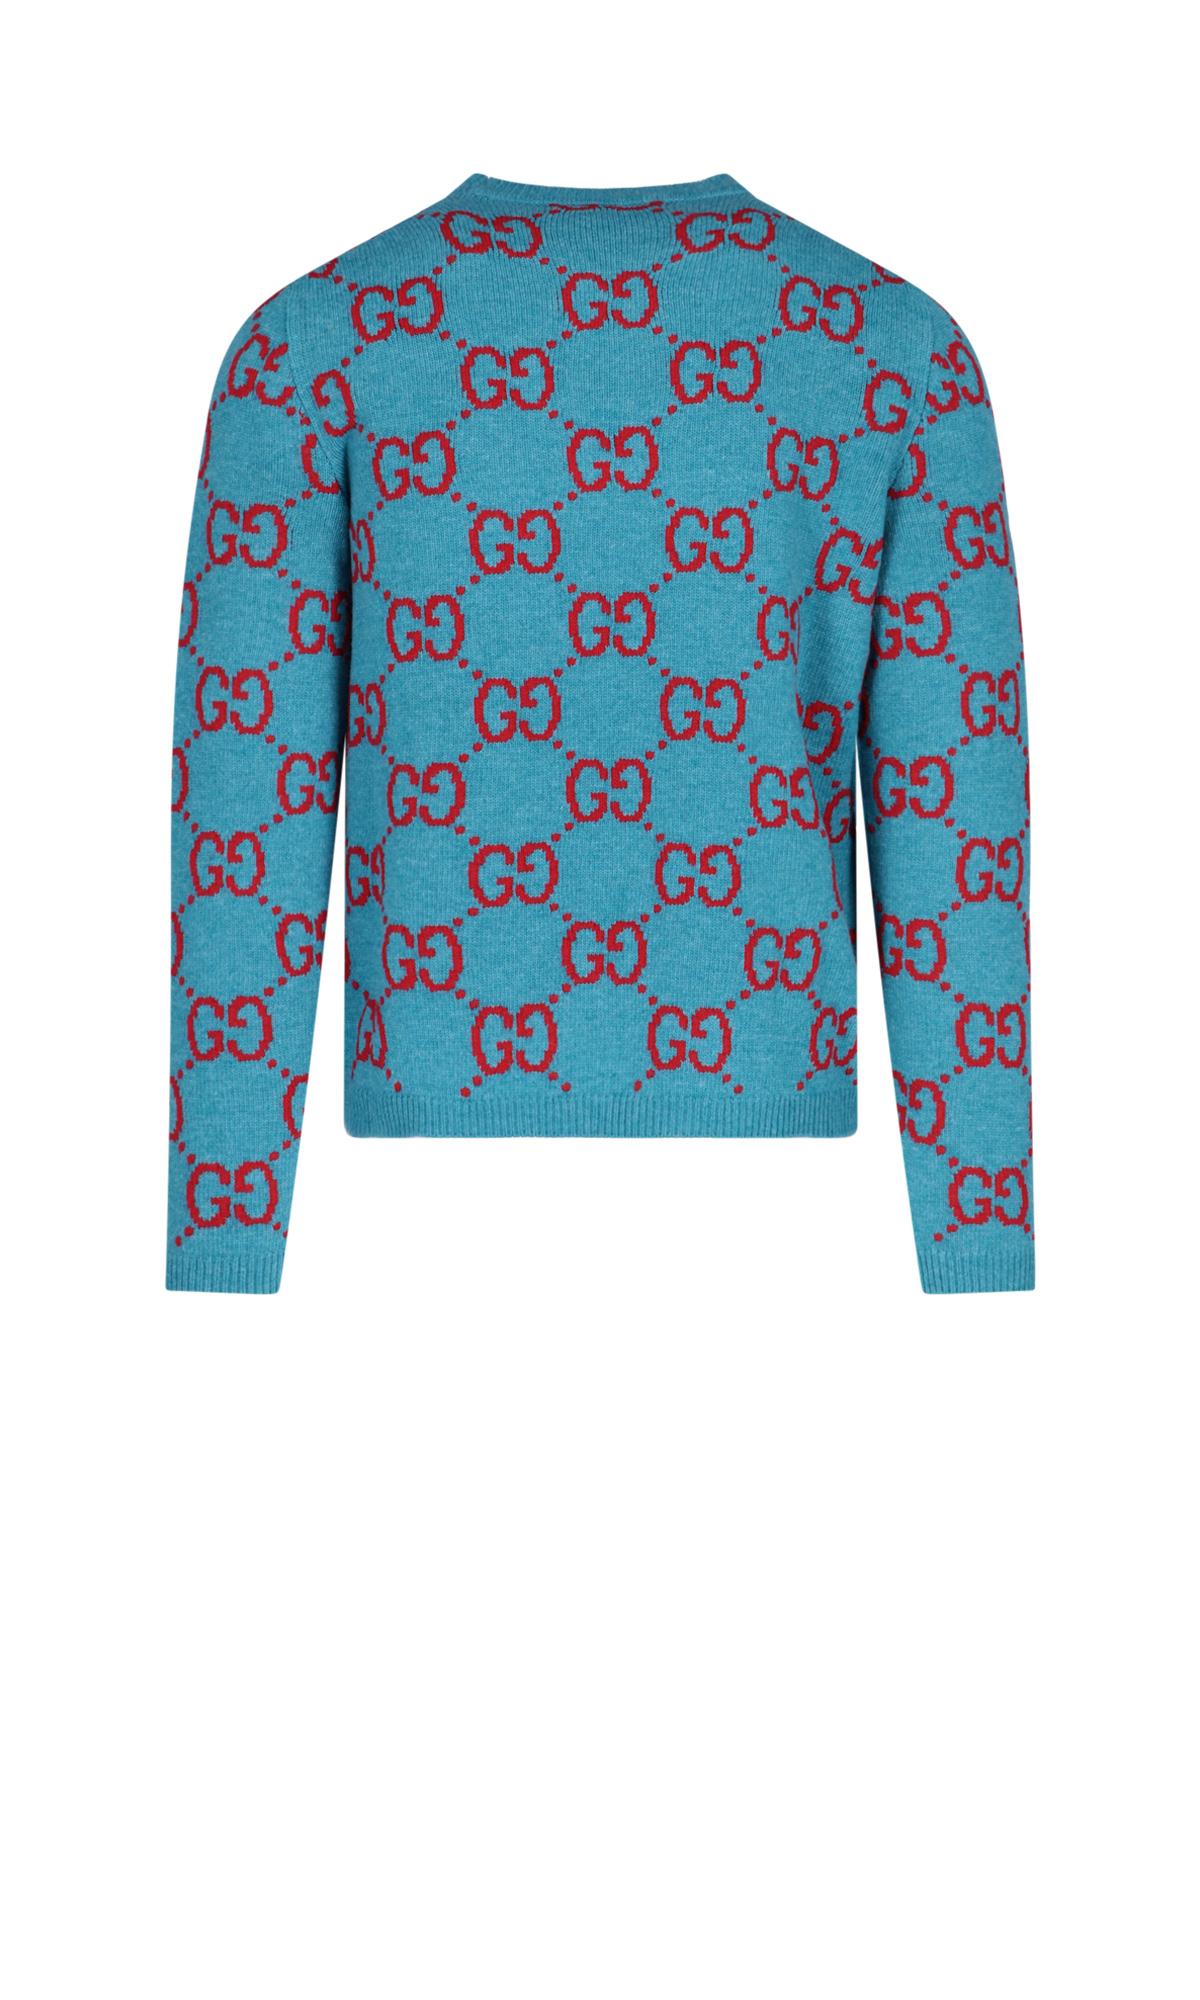 Gucci 'GG' Pattern Sweater in Blue for Men | Lyst